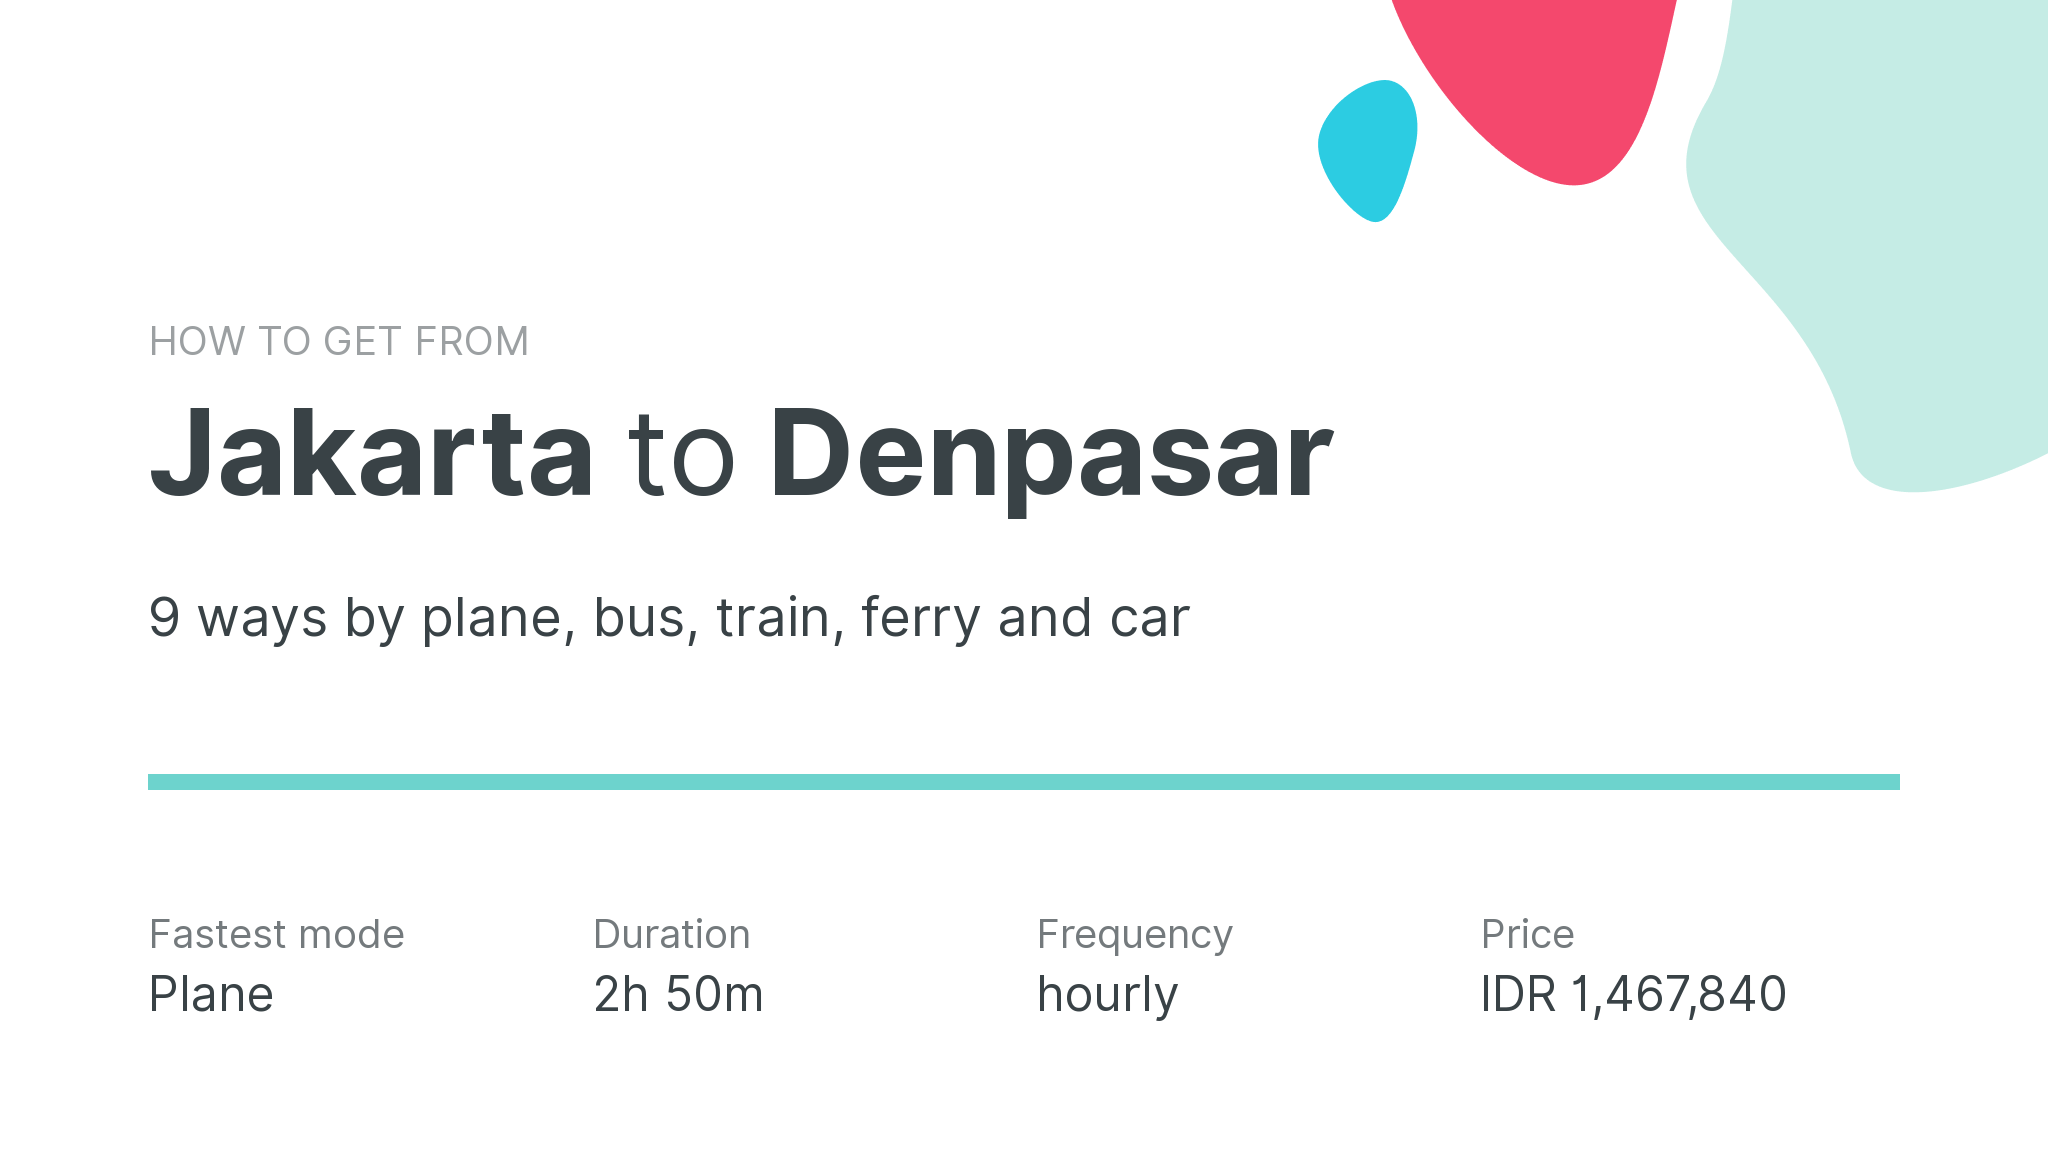 How do I get from Jakarta to Denpasar